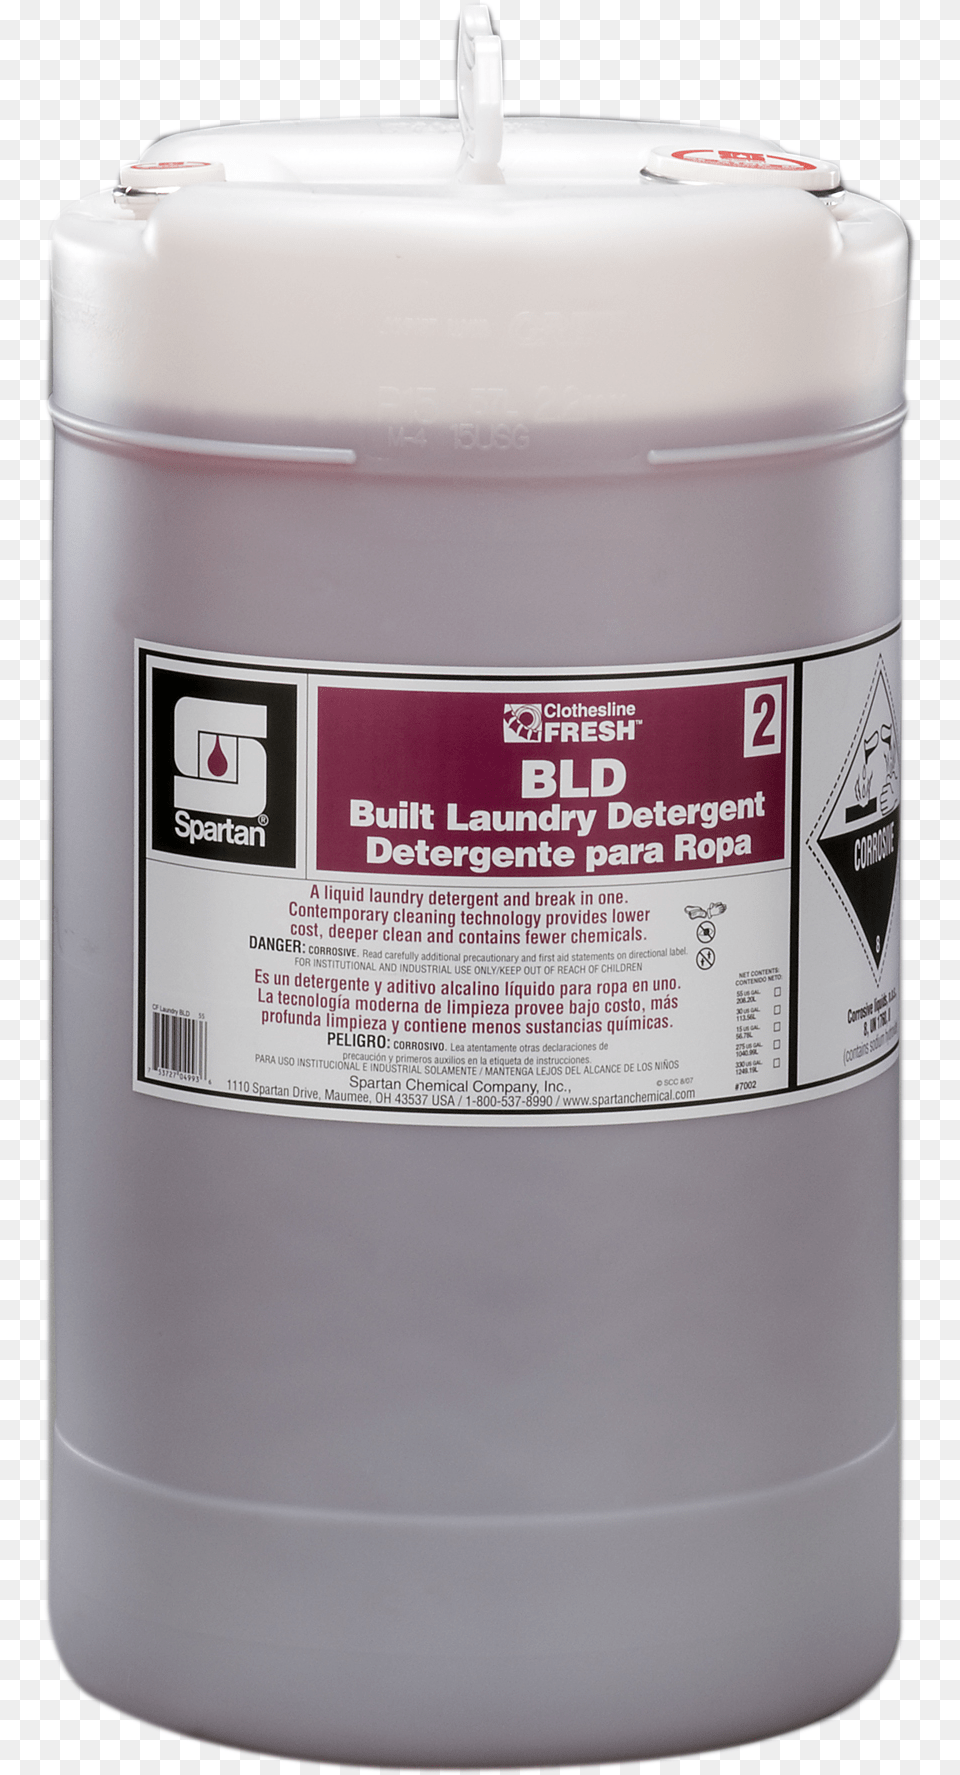 Clf Bld Acrylic Paint, Bottle, Shaker Free Transparent Png